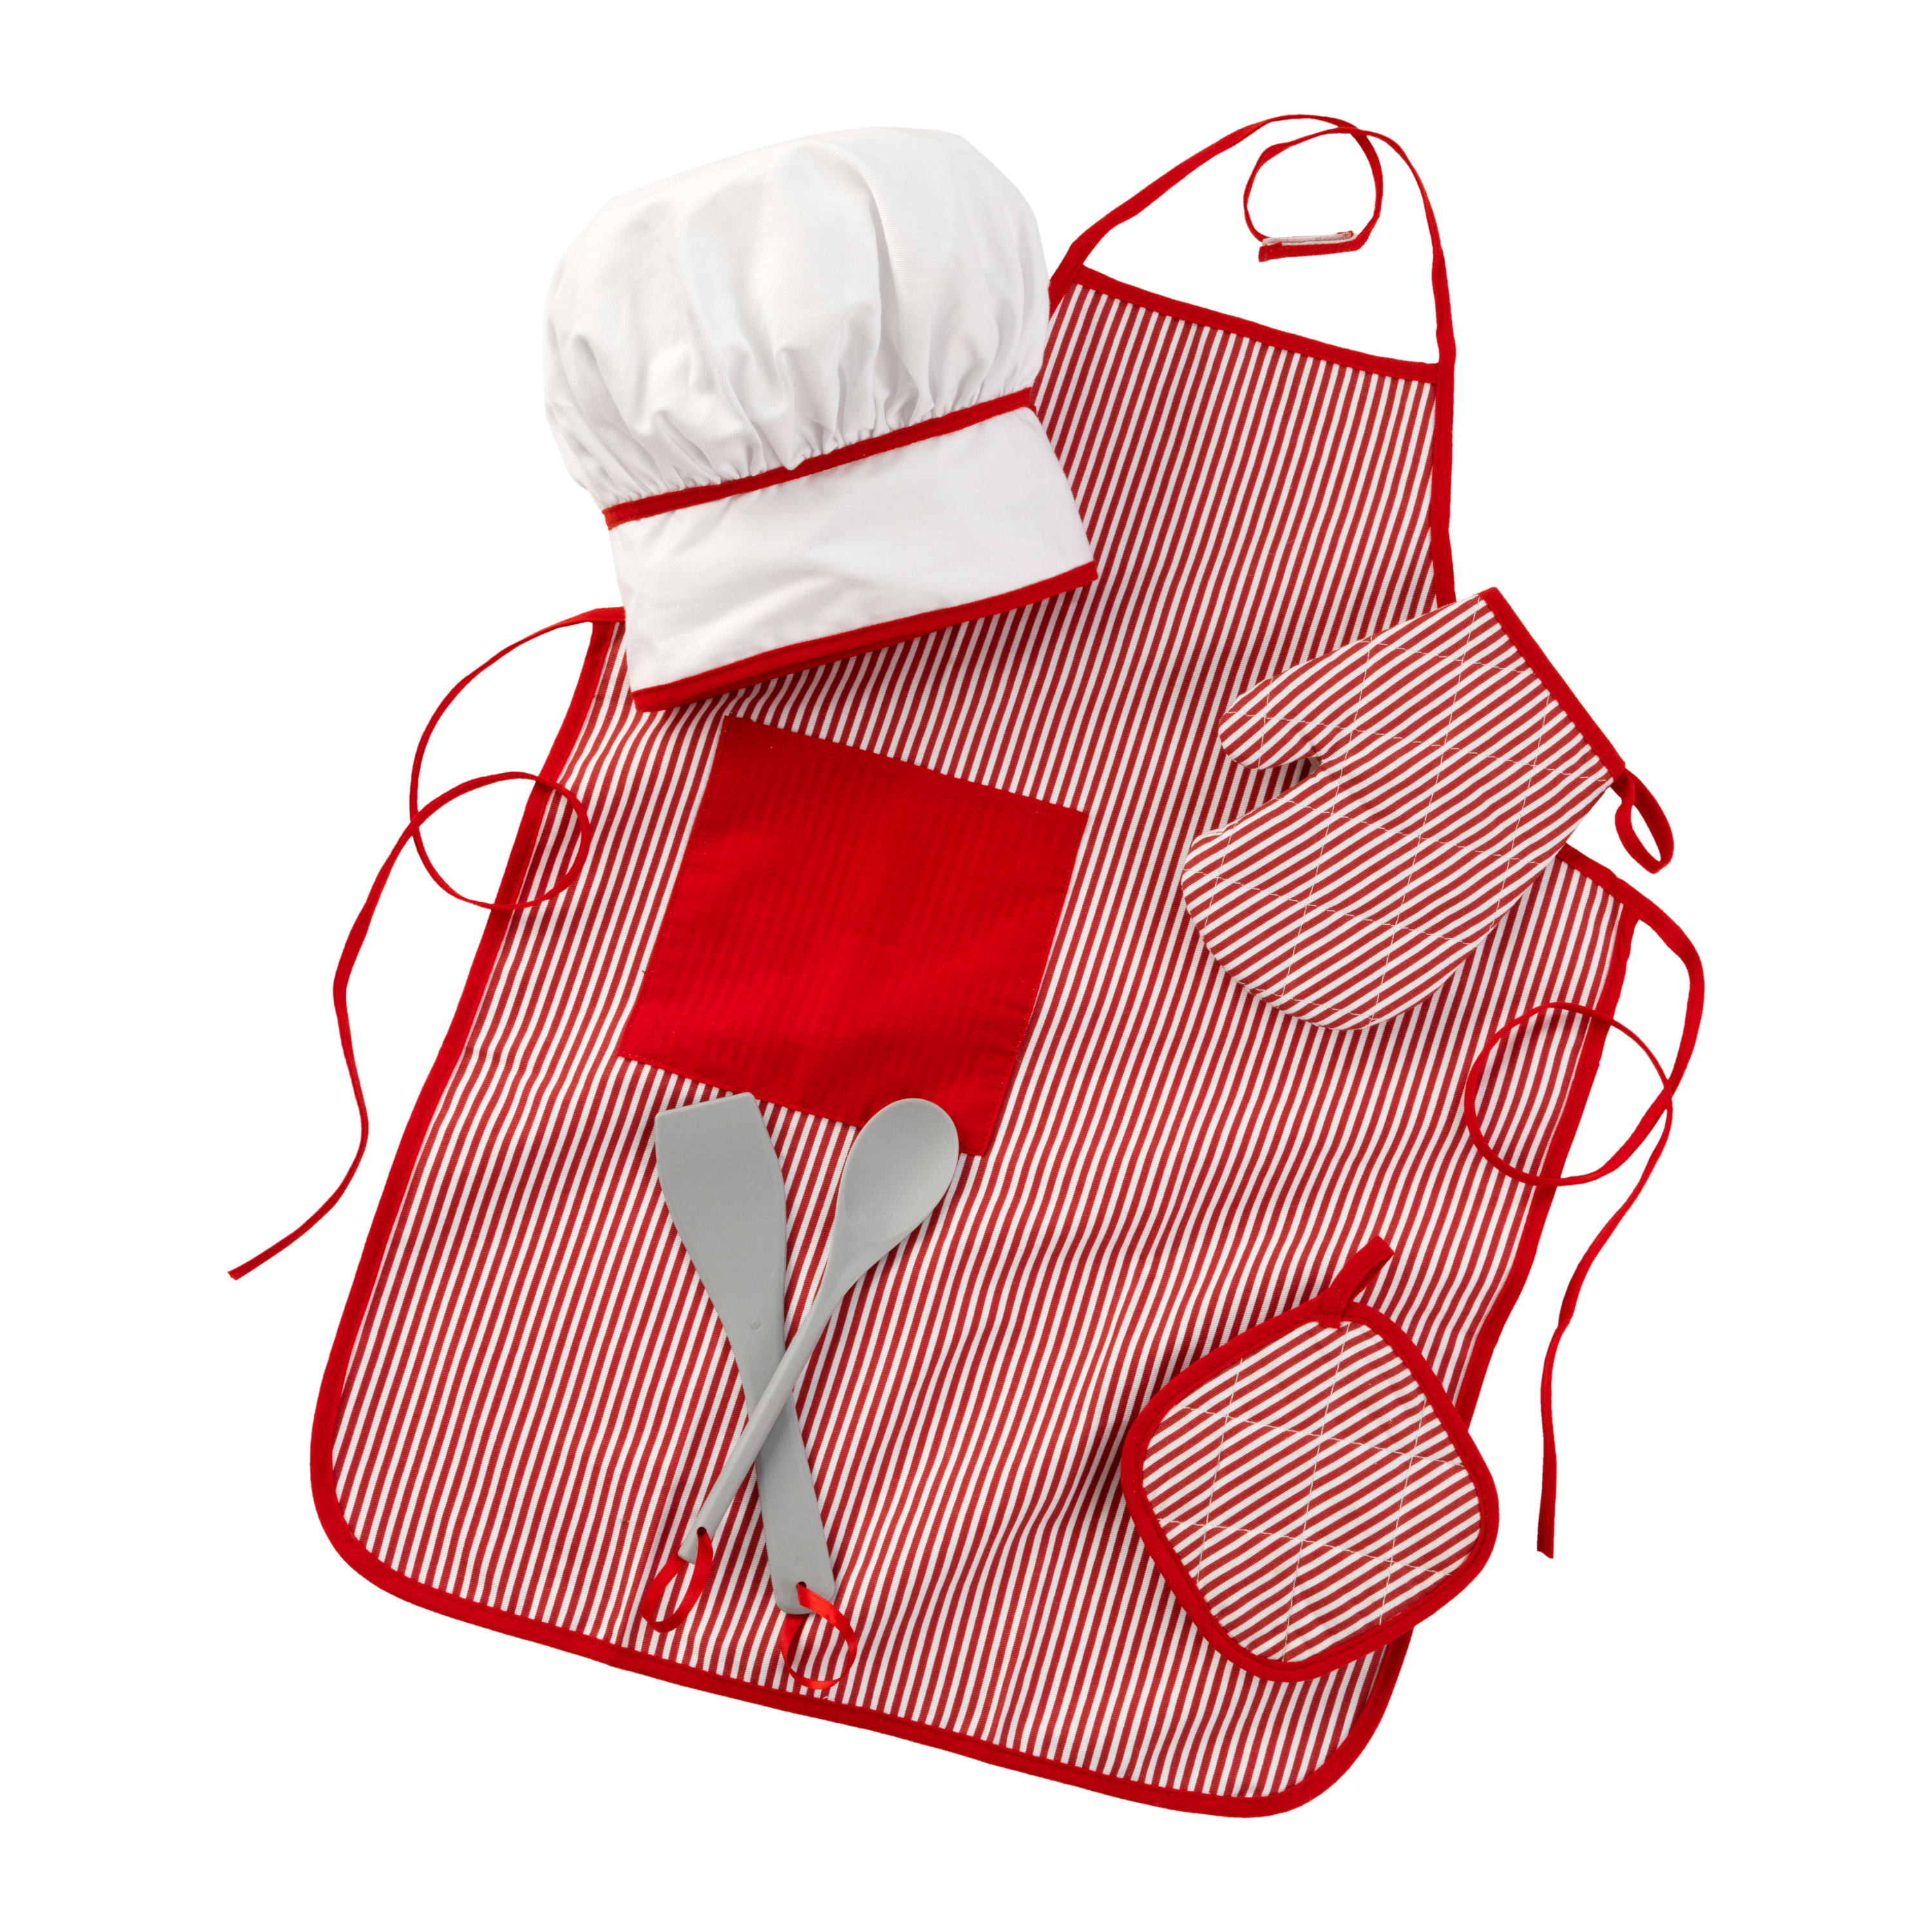 KidKraft Tasty Treats Chef Apron, Hat and Accessory Set for Kids - Red - image 1 of 4